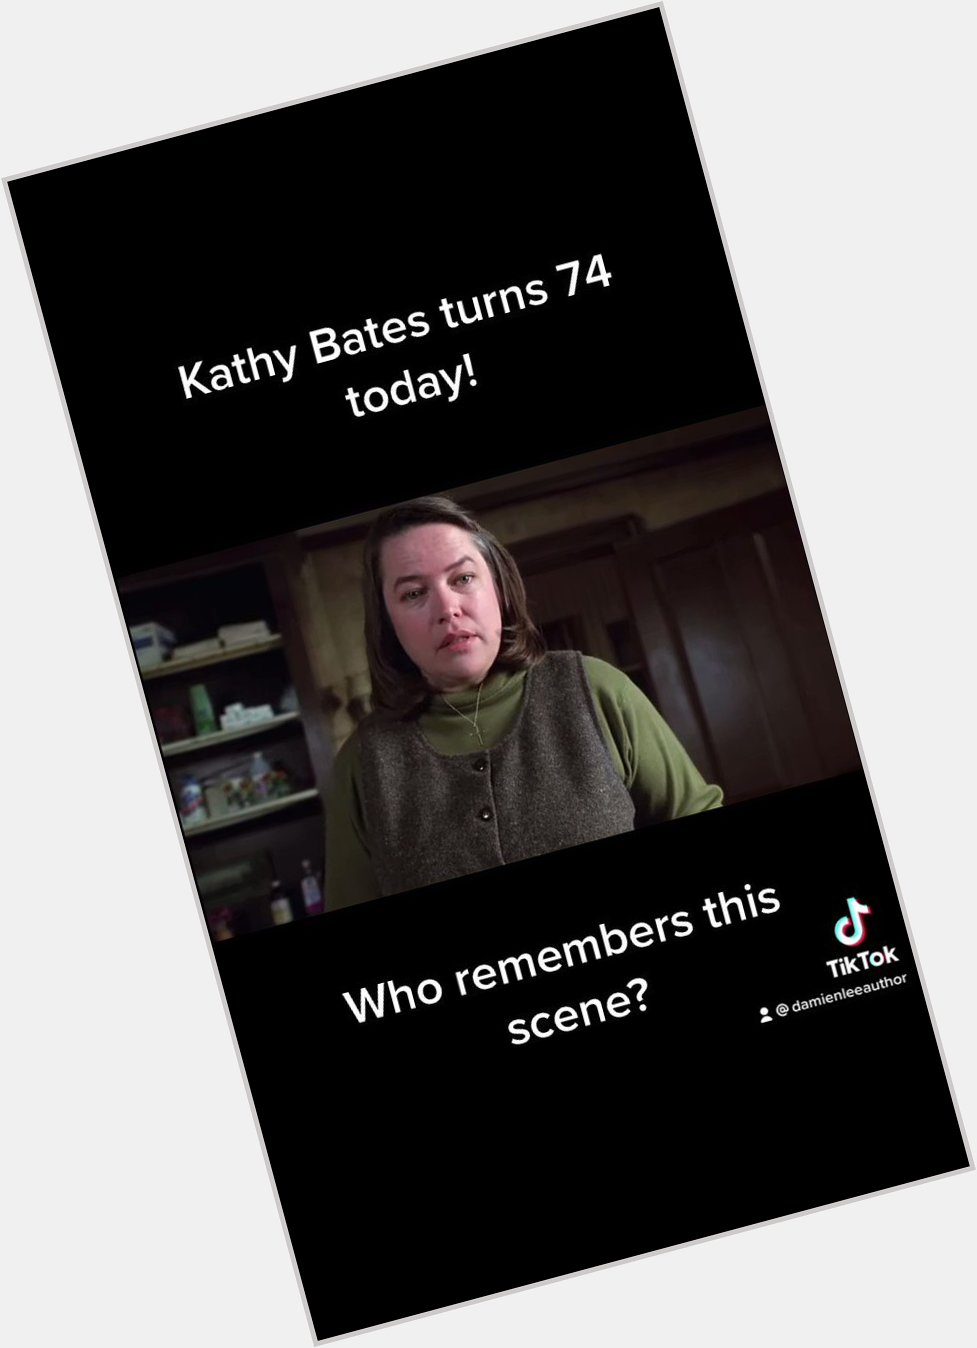 Happy birthday Kathy Bates! I can t think of anyone better to portray Annie Wilkes! 